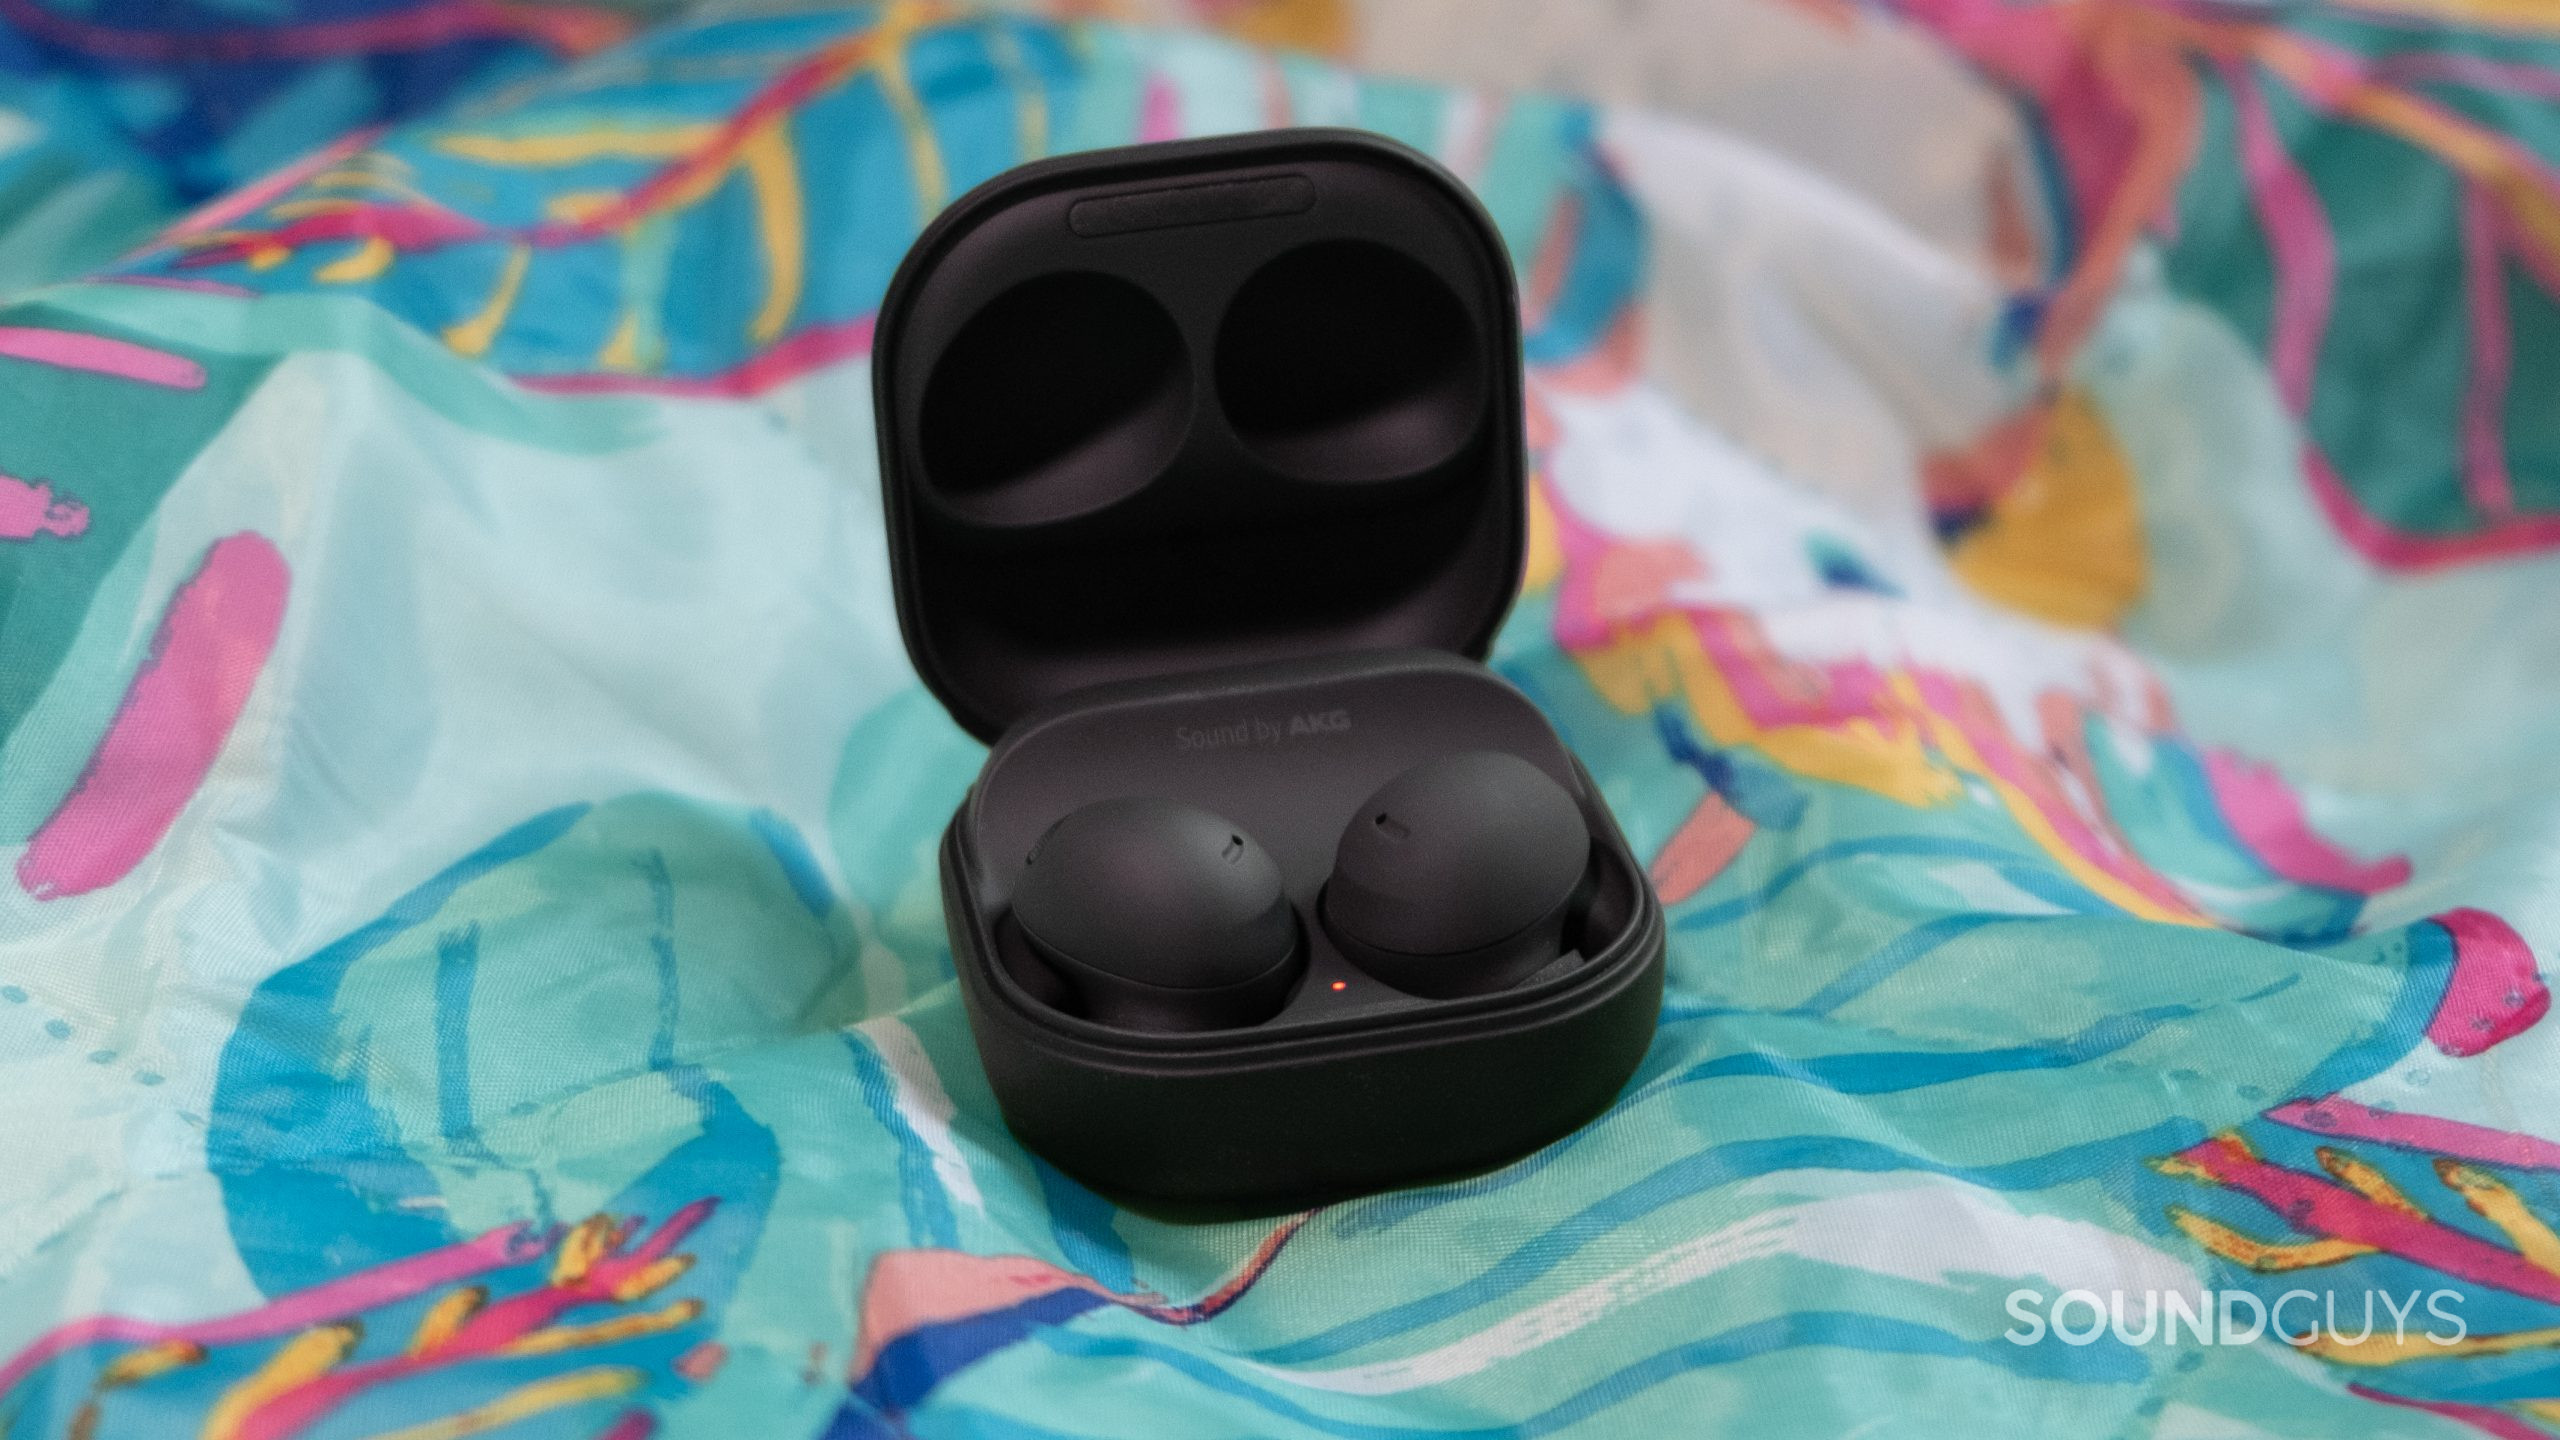 On a tropical themed outdoor blanket the open case of the Samsung Galaxy Buds 2 Pro rests with the lid open.